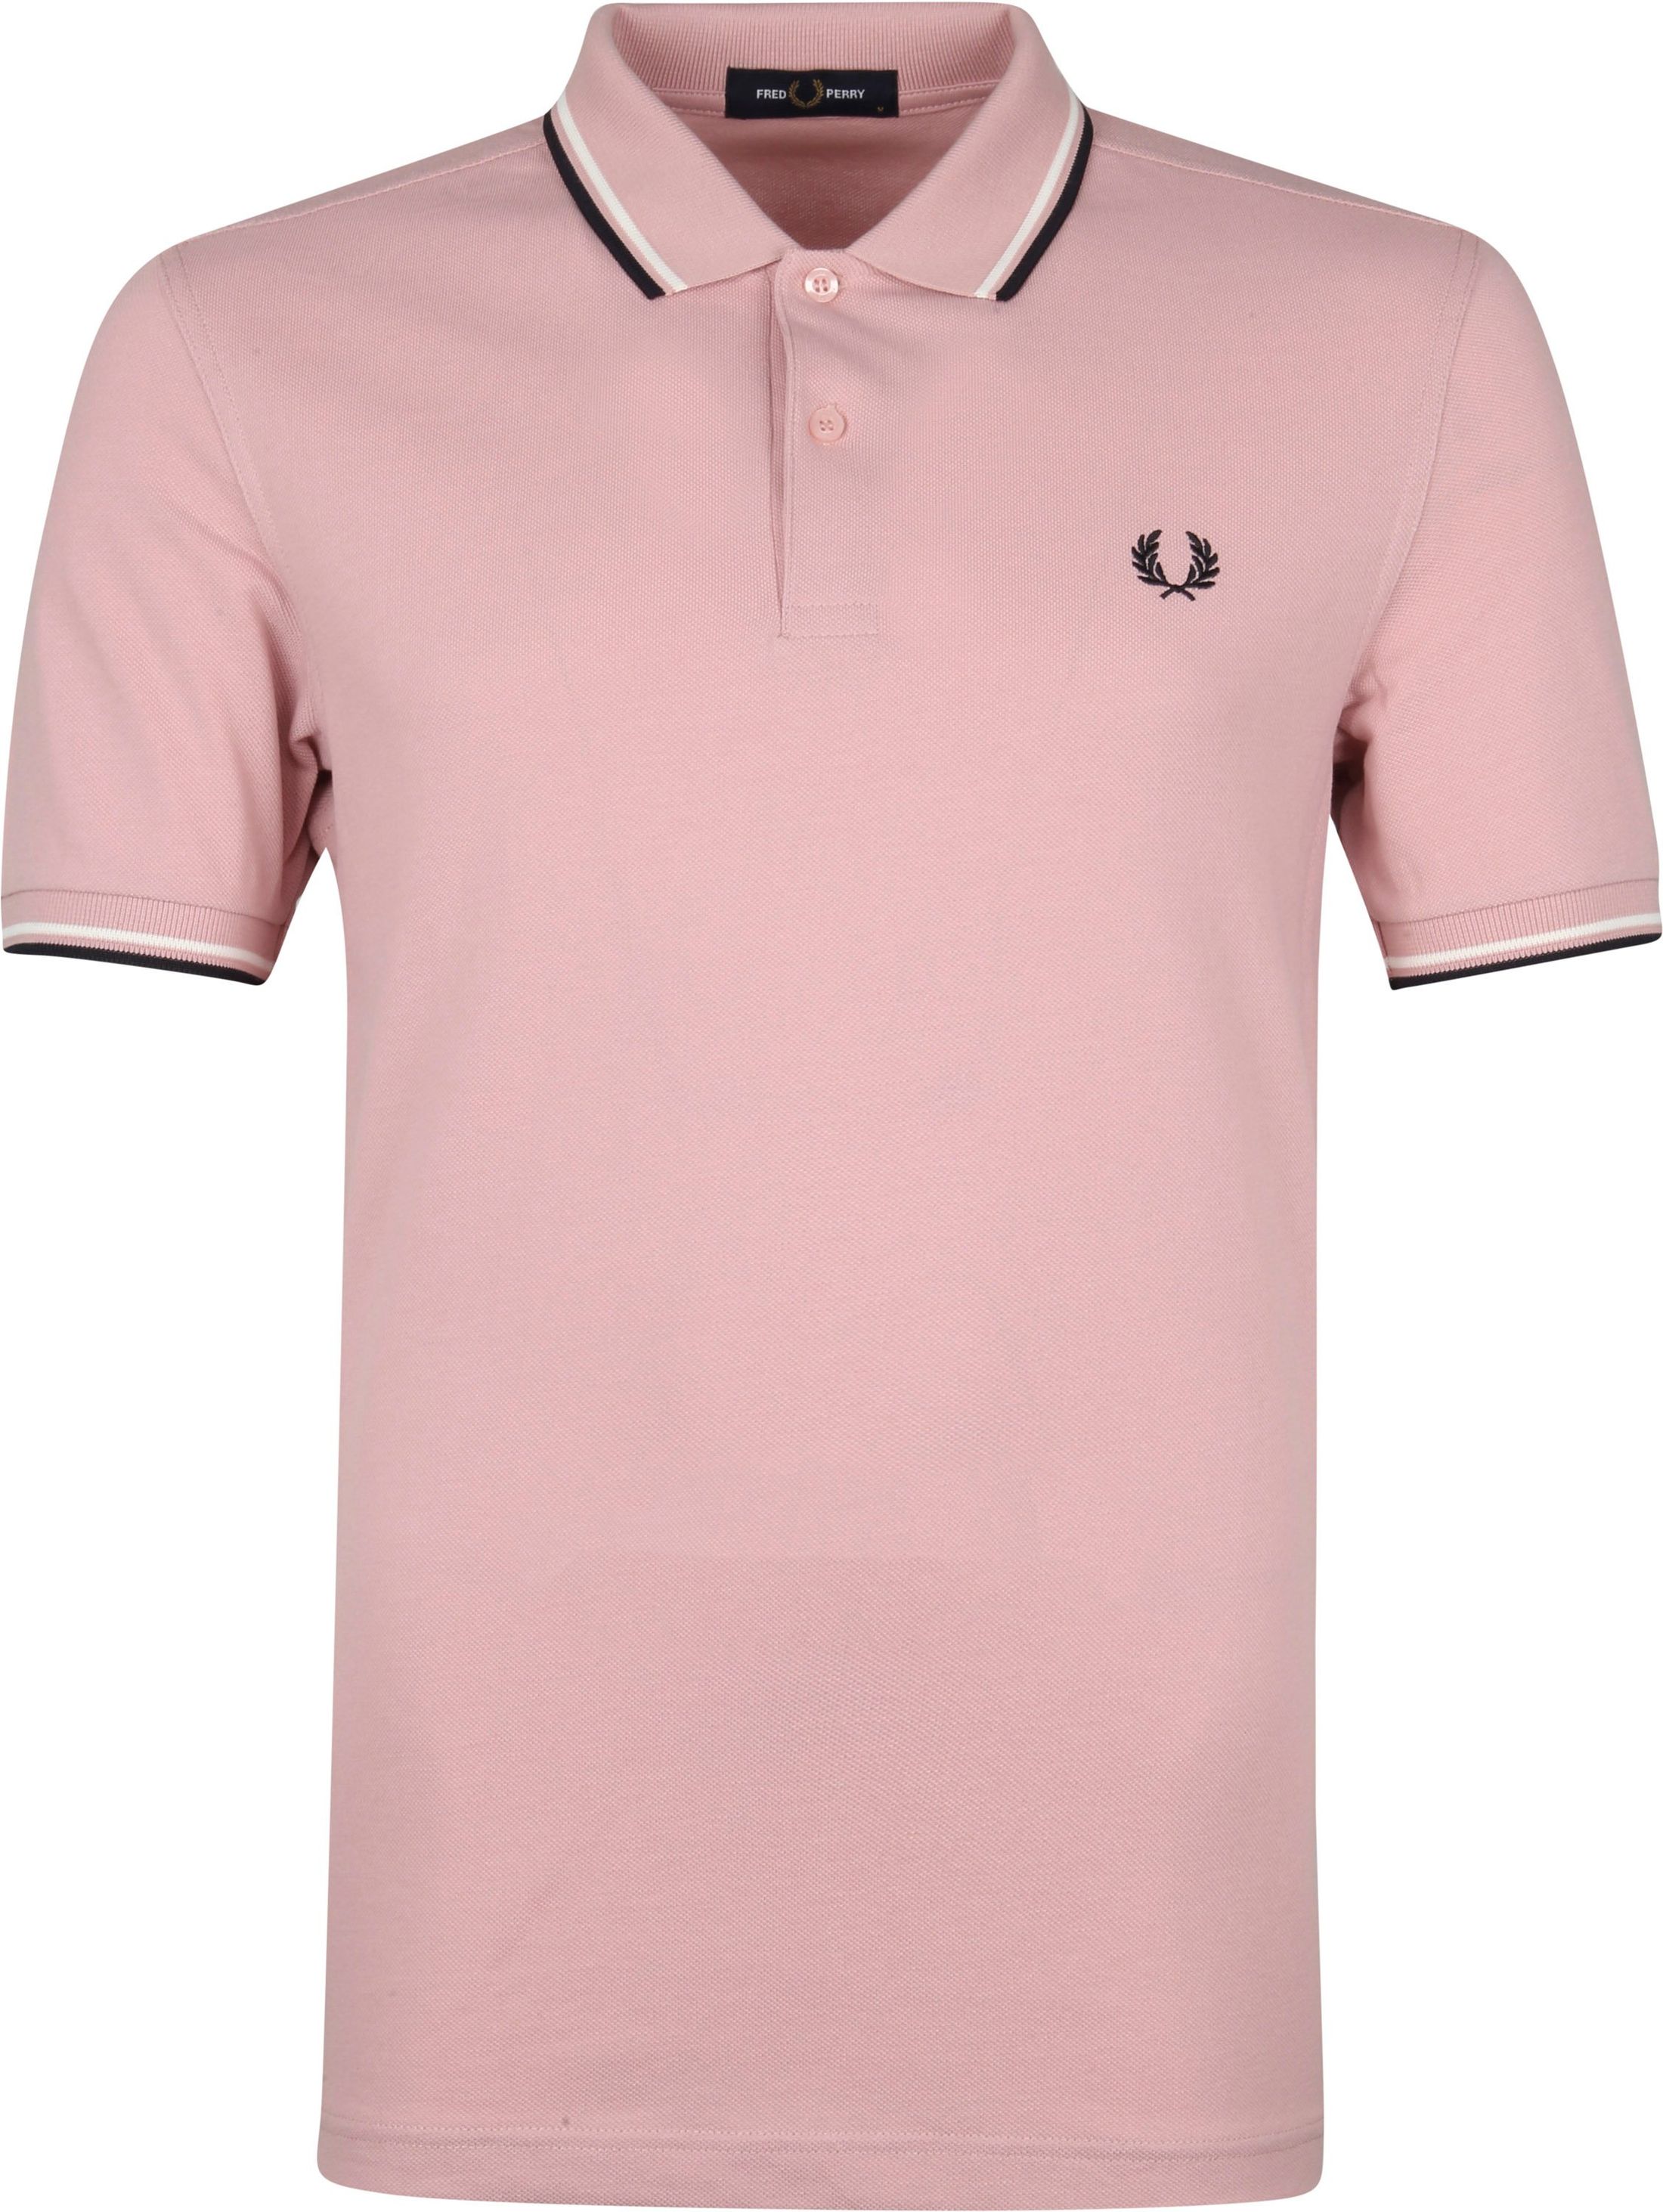 Fred Perry Polo Shirt M3600 Pink size L